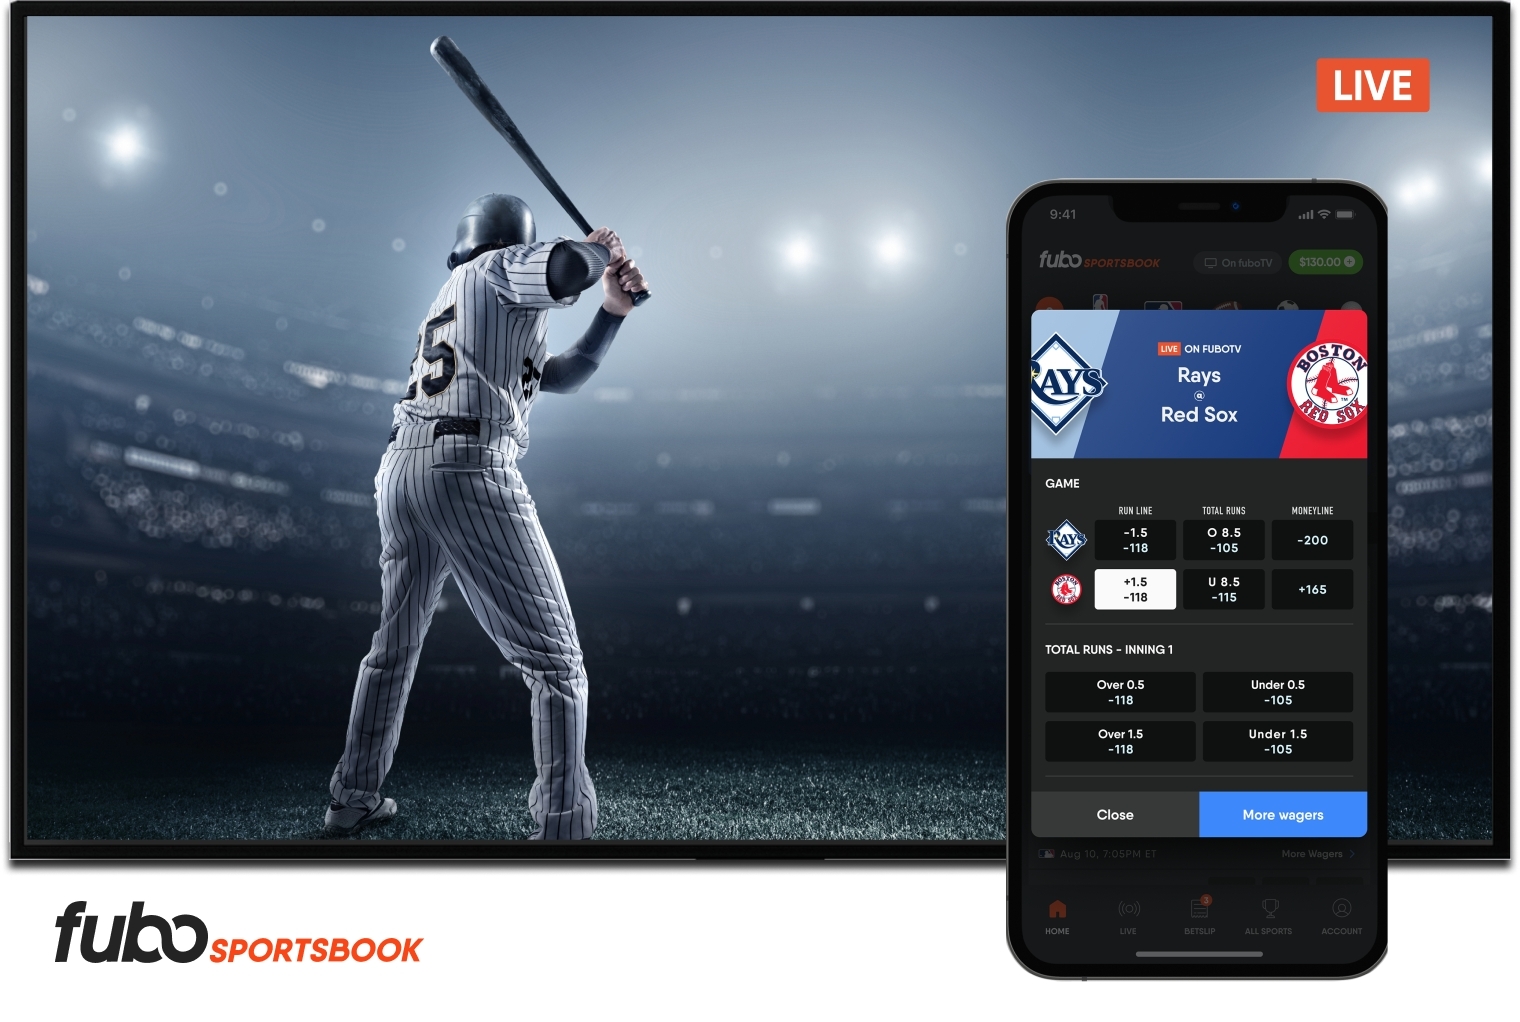 Fubo Sportsbook Officially Launches, Bringing First Owned-and-Operated Live TV Streaming-Integrated Mobile Sportsbook to Market in the United States Business Wire